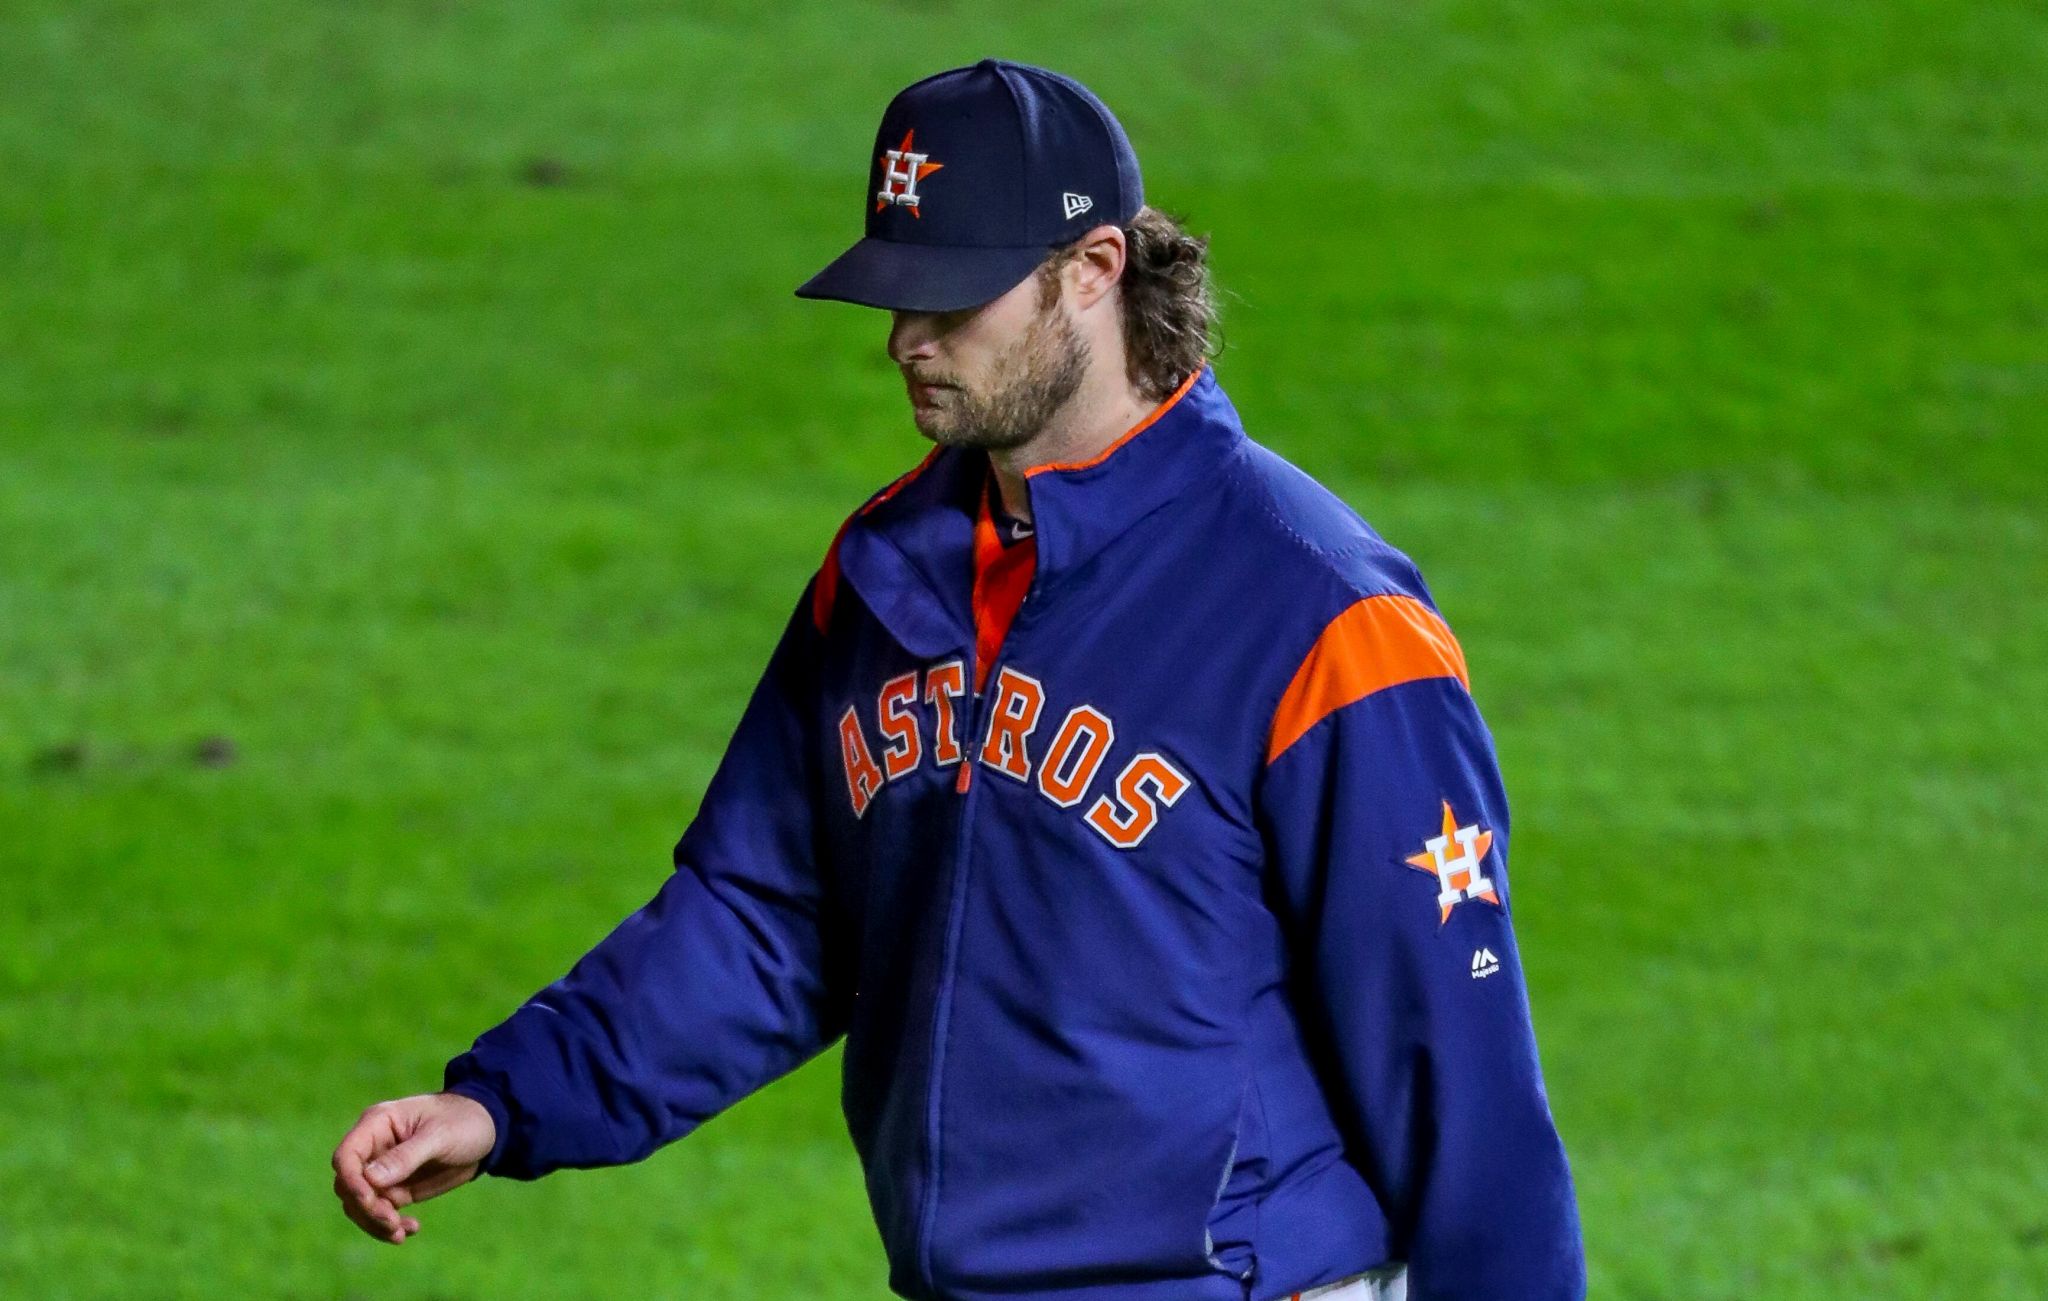 The Astros won the 2017 World Series, and now they have Gerrit Cole 